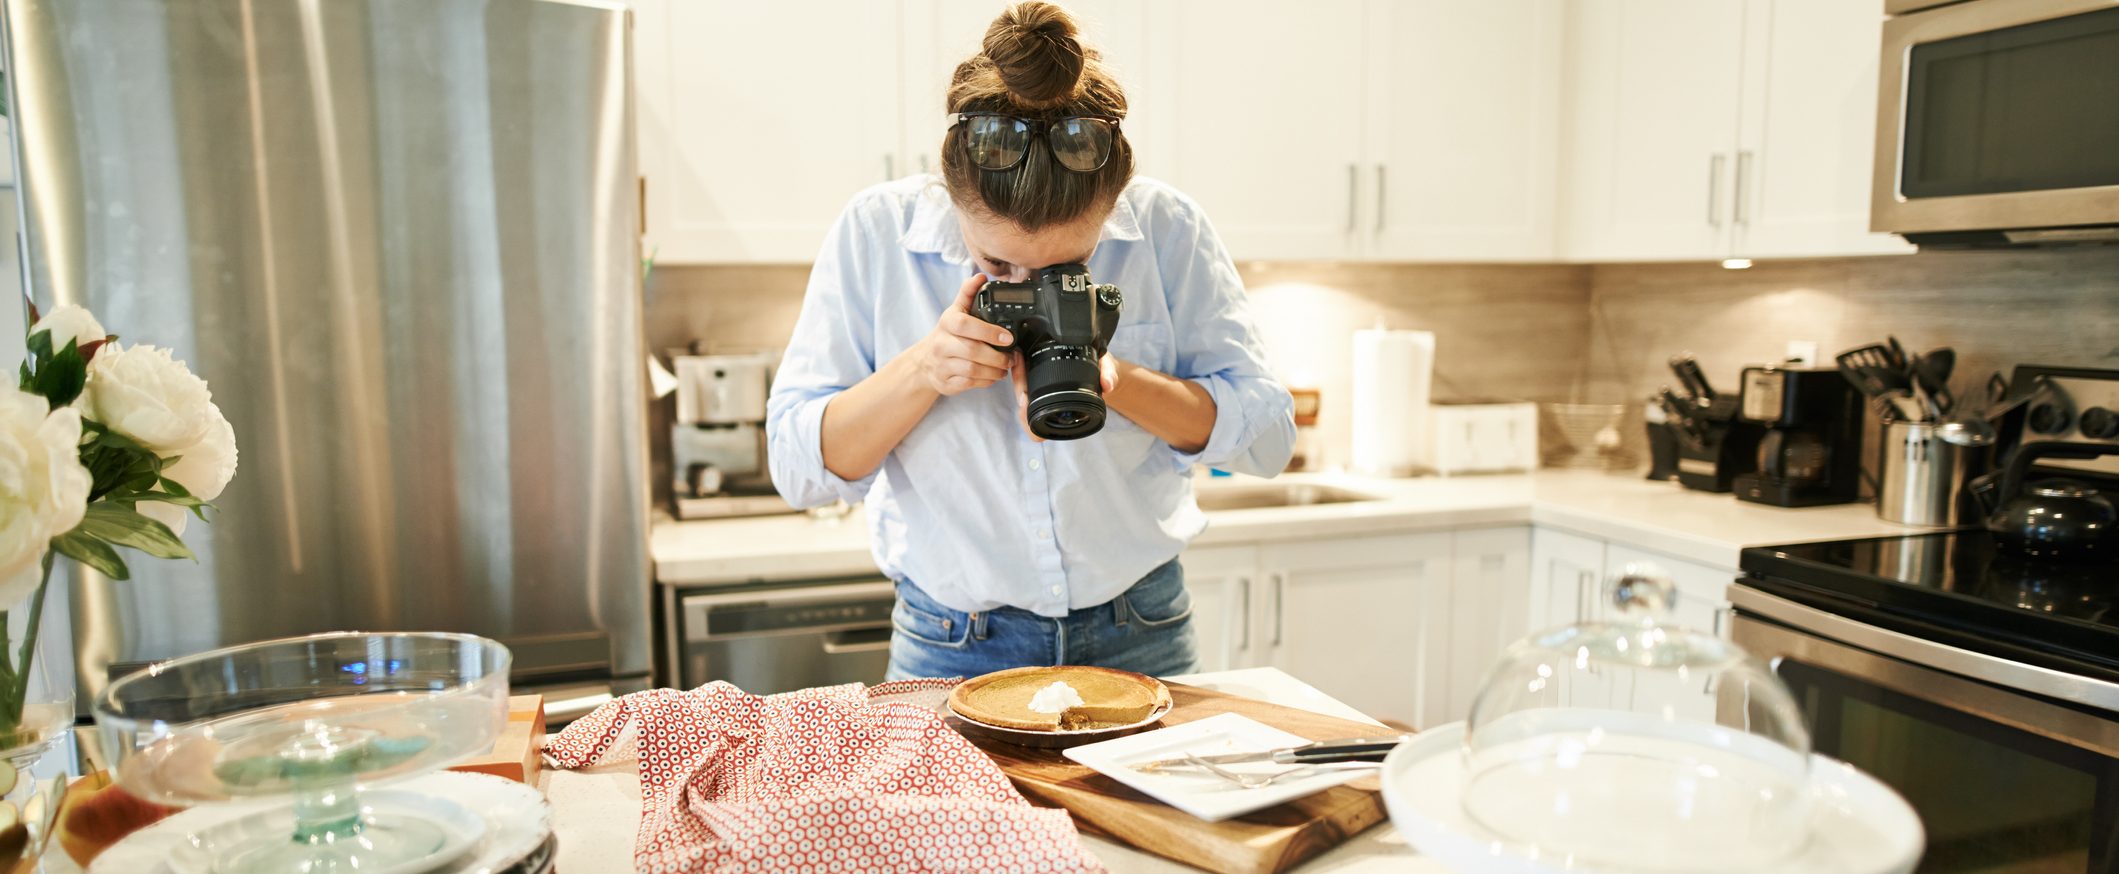 A person takes photos in a kitchen.